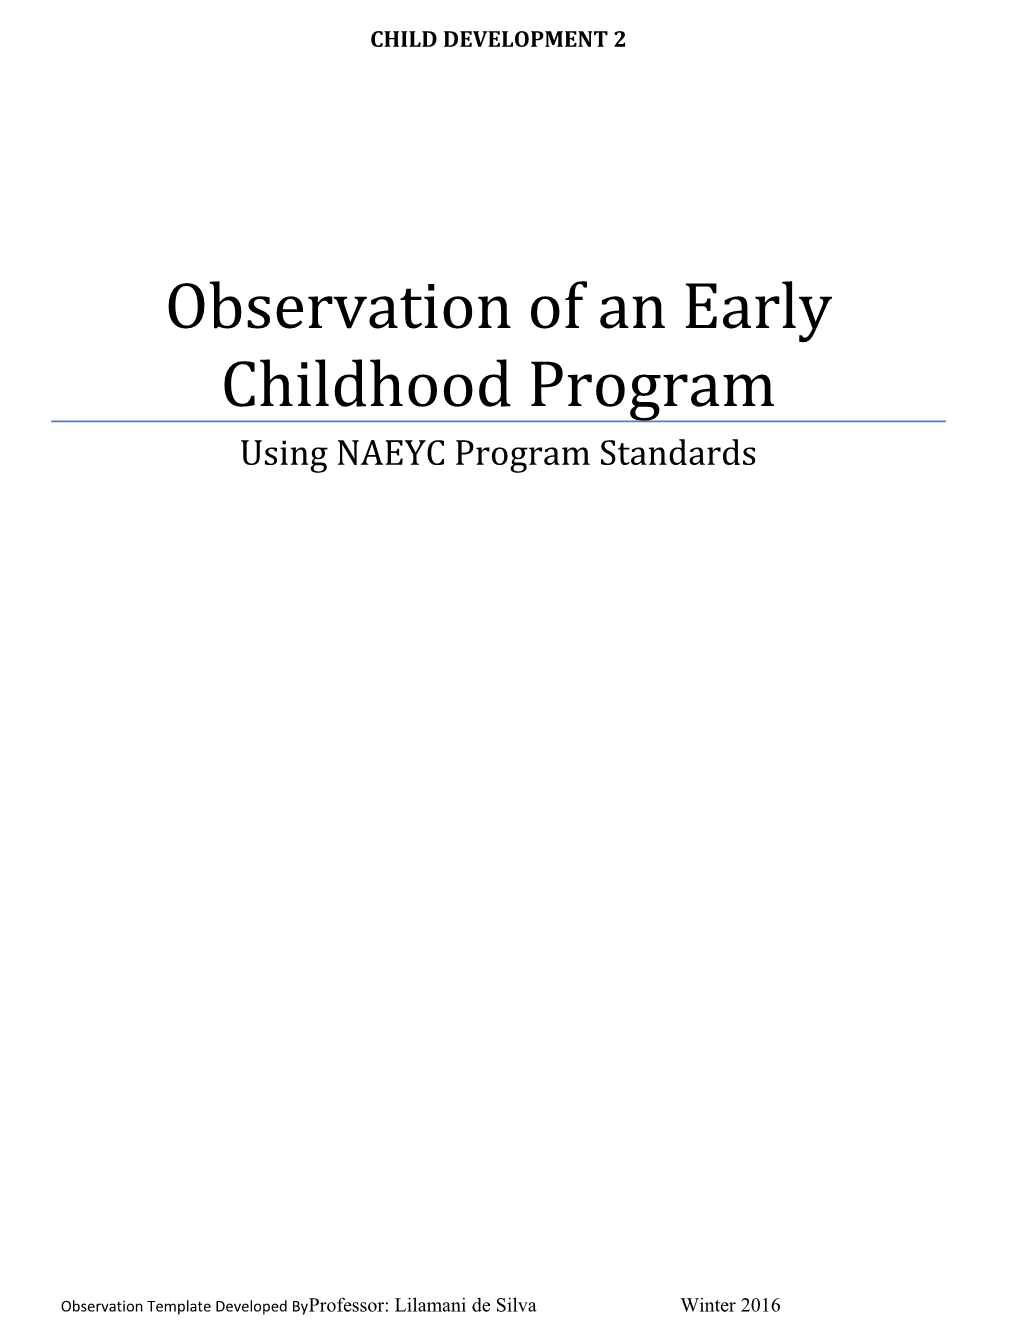 Observation of an Early Childhood Program